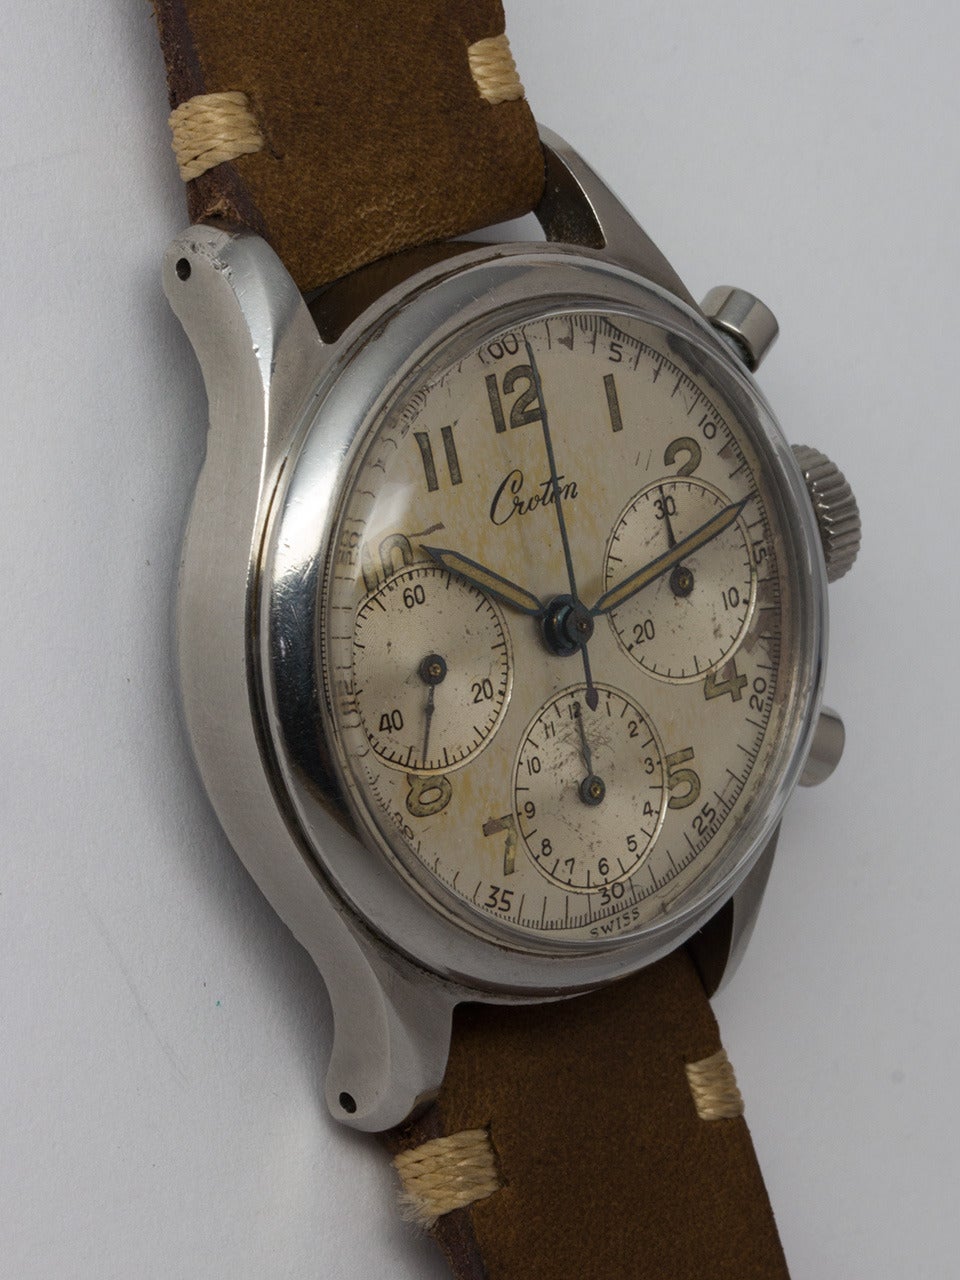 Croton Stainless Steel Chronograph Wristwatch, circa 1950s. 34mm case with screw back and round pushers. With a very pleasing original two-tone silvered satin dial with luminous dial and hands. Powered by a popular Valjoux 72 manual-wind movement